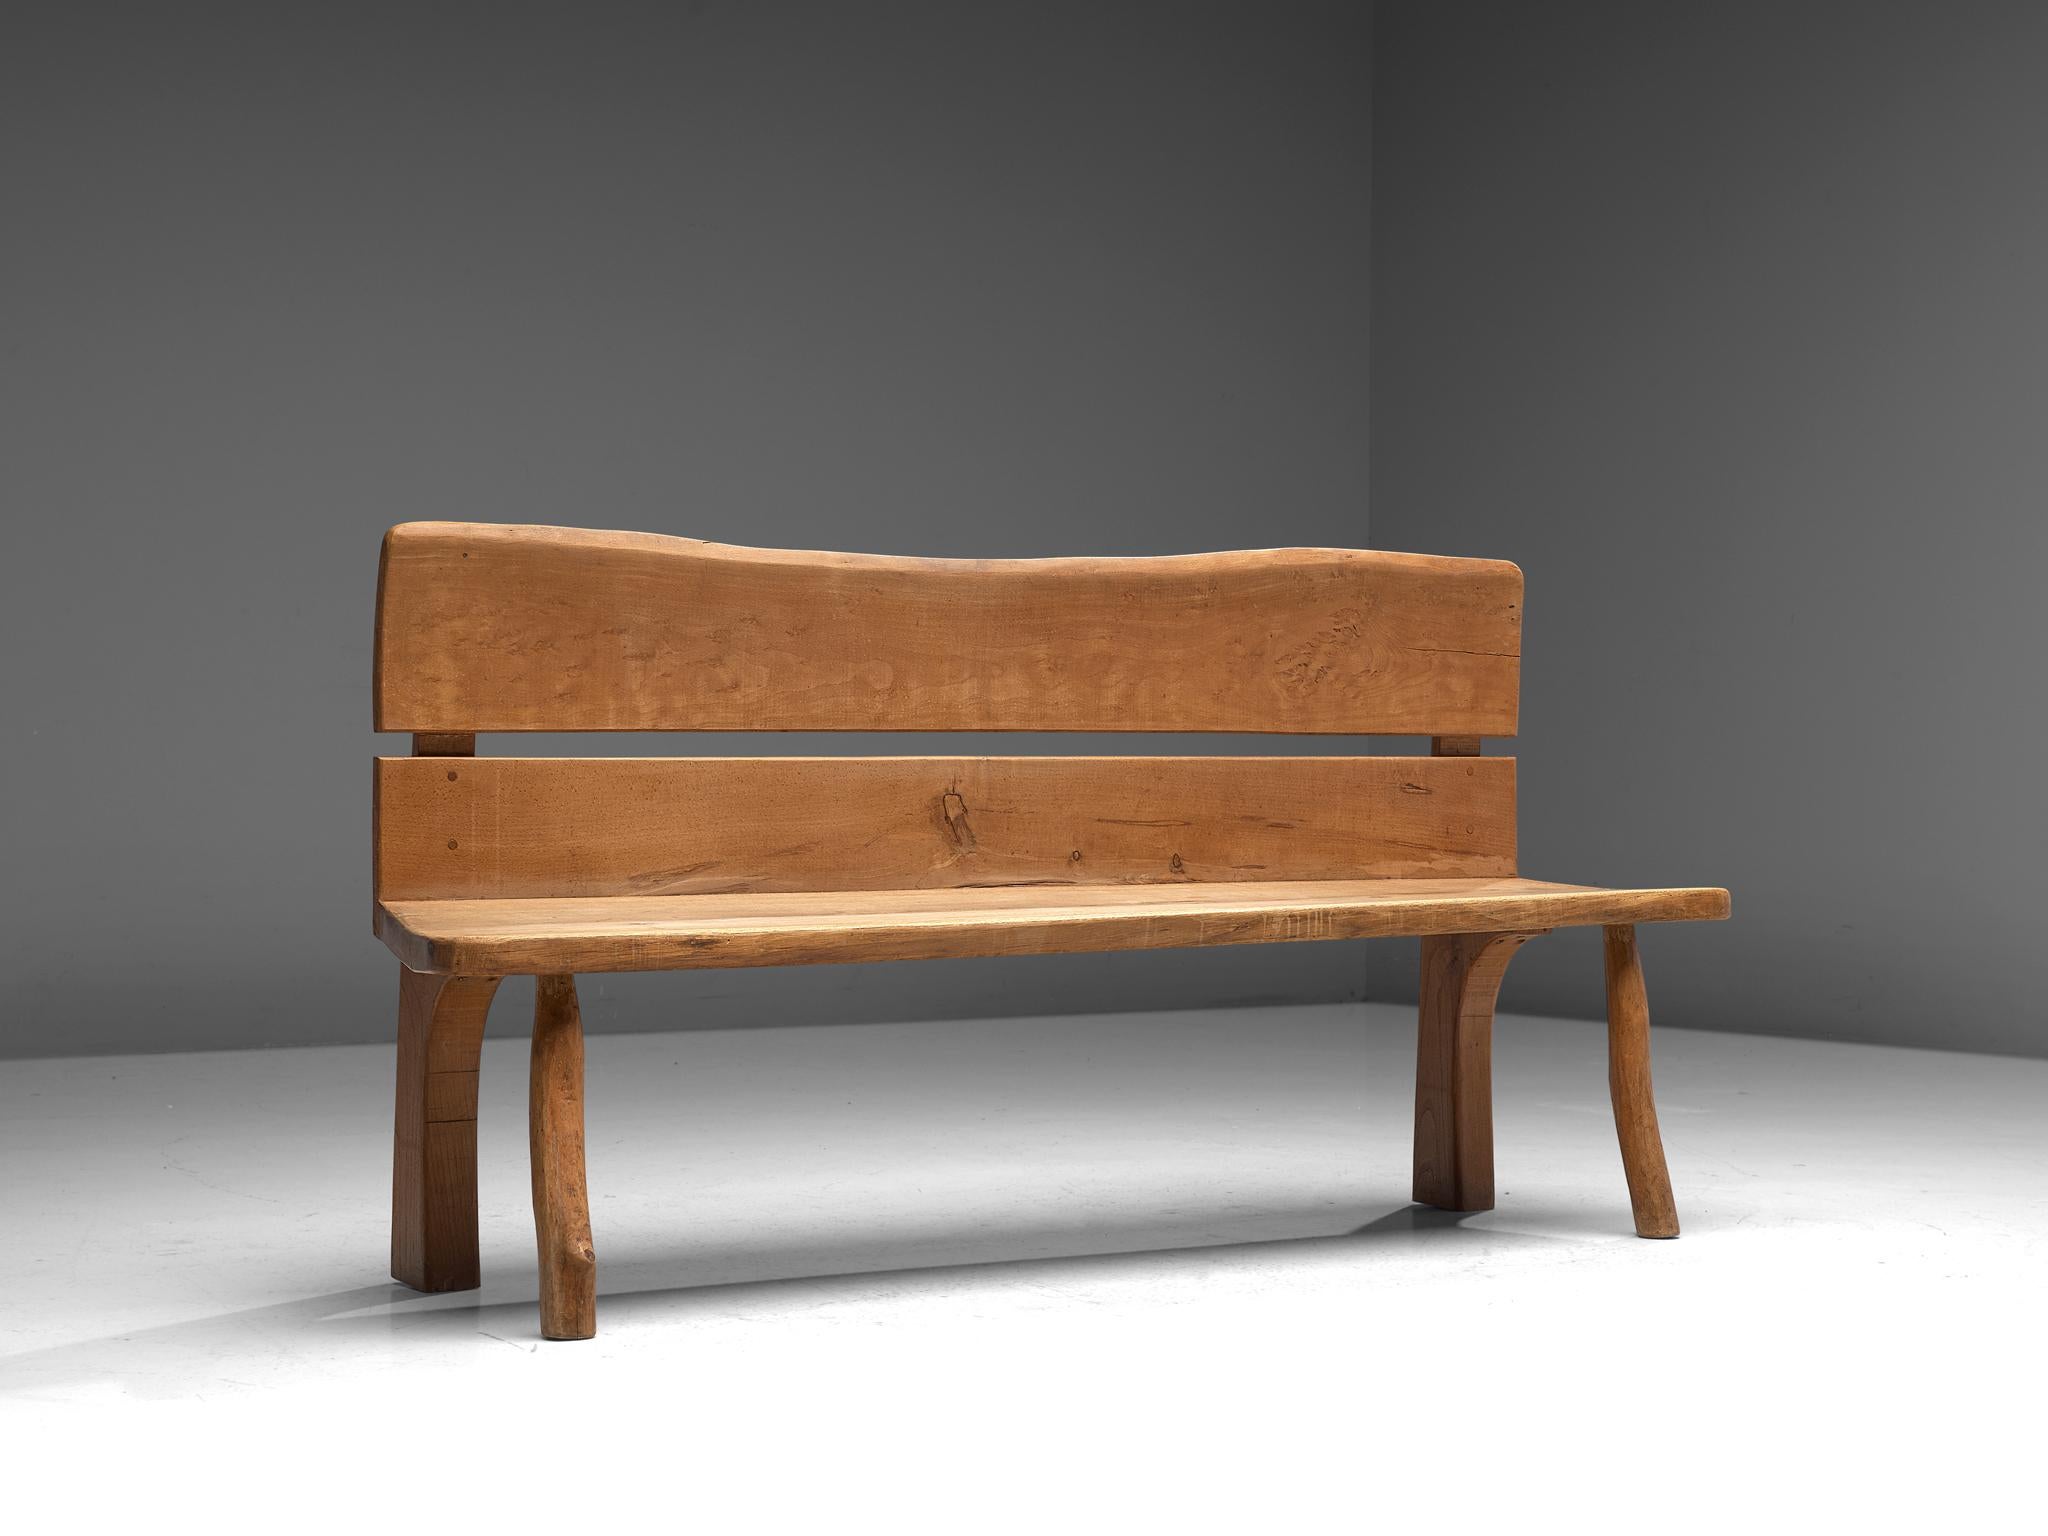 Bench, oak, France, 1960s.

French oak wooden bench that has robust design with organic elements. The bulky bench is made of beautiful oak wood that developed a nice, rustic patina from age and use. The design features solely thick planks with